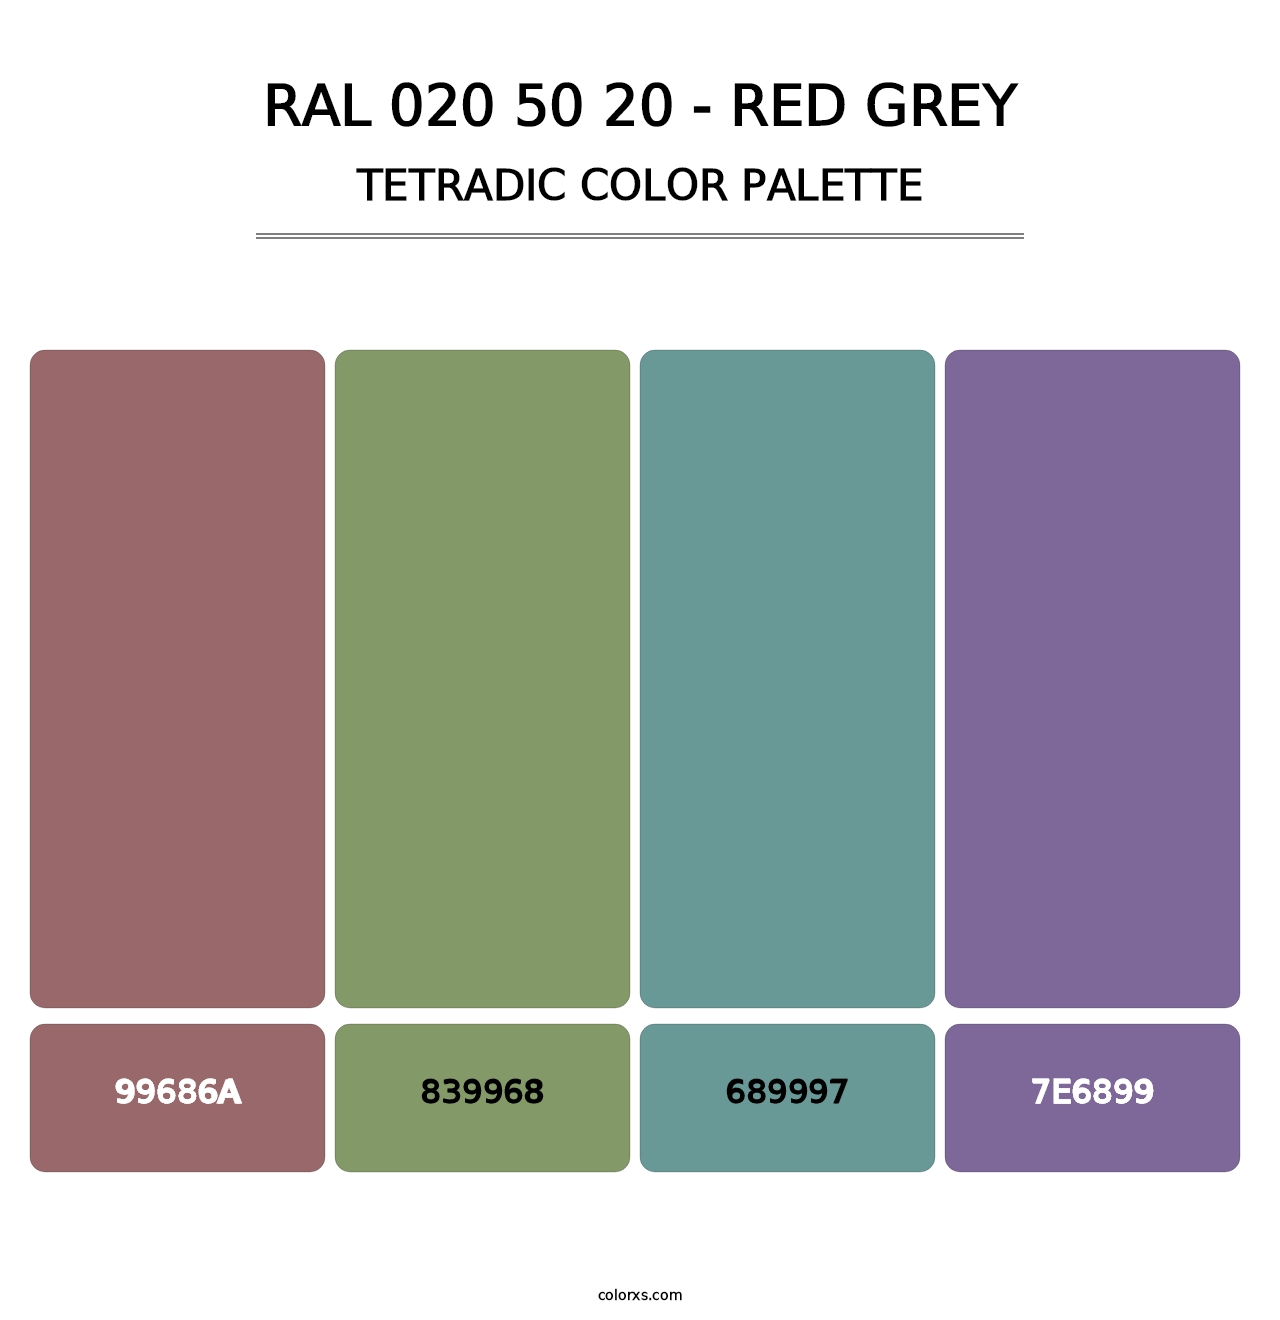 RAL 020 50 20 - Red Grey - Tetradic Color Palette